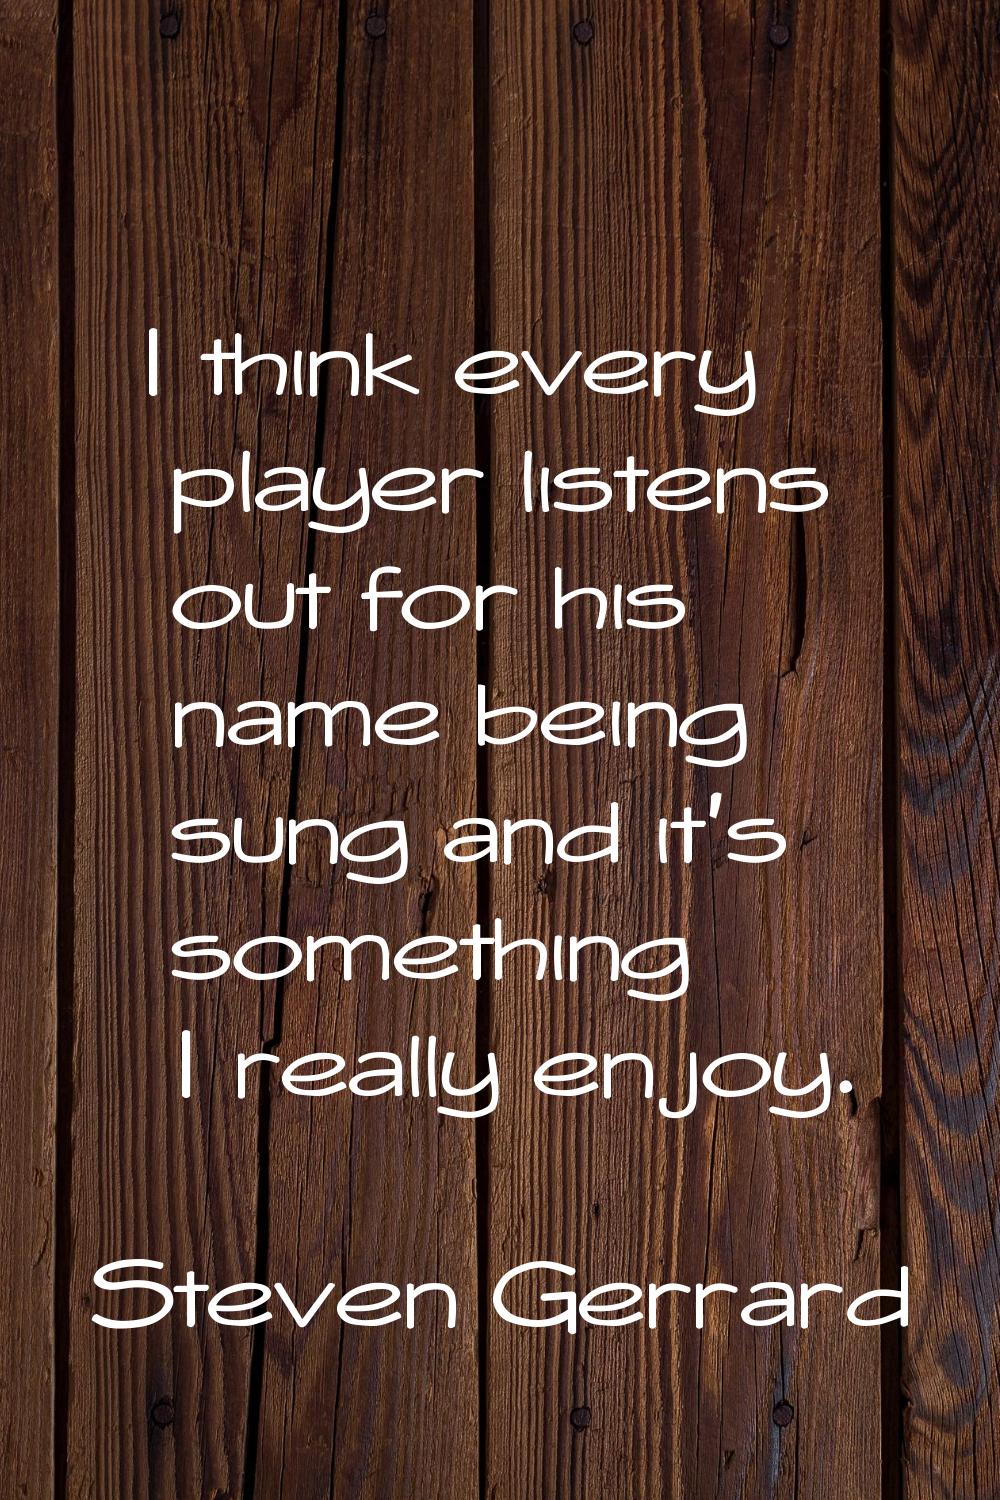 I think every player listens out for his name being sung and it's something I really enjoy.